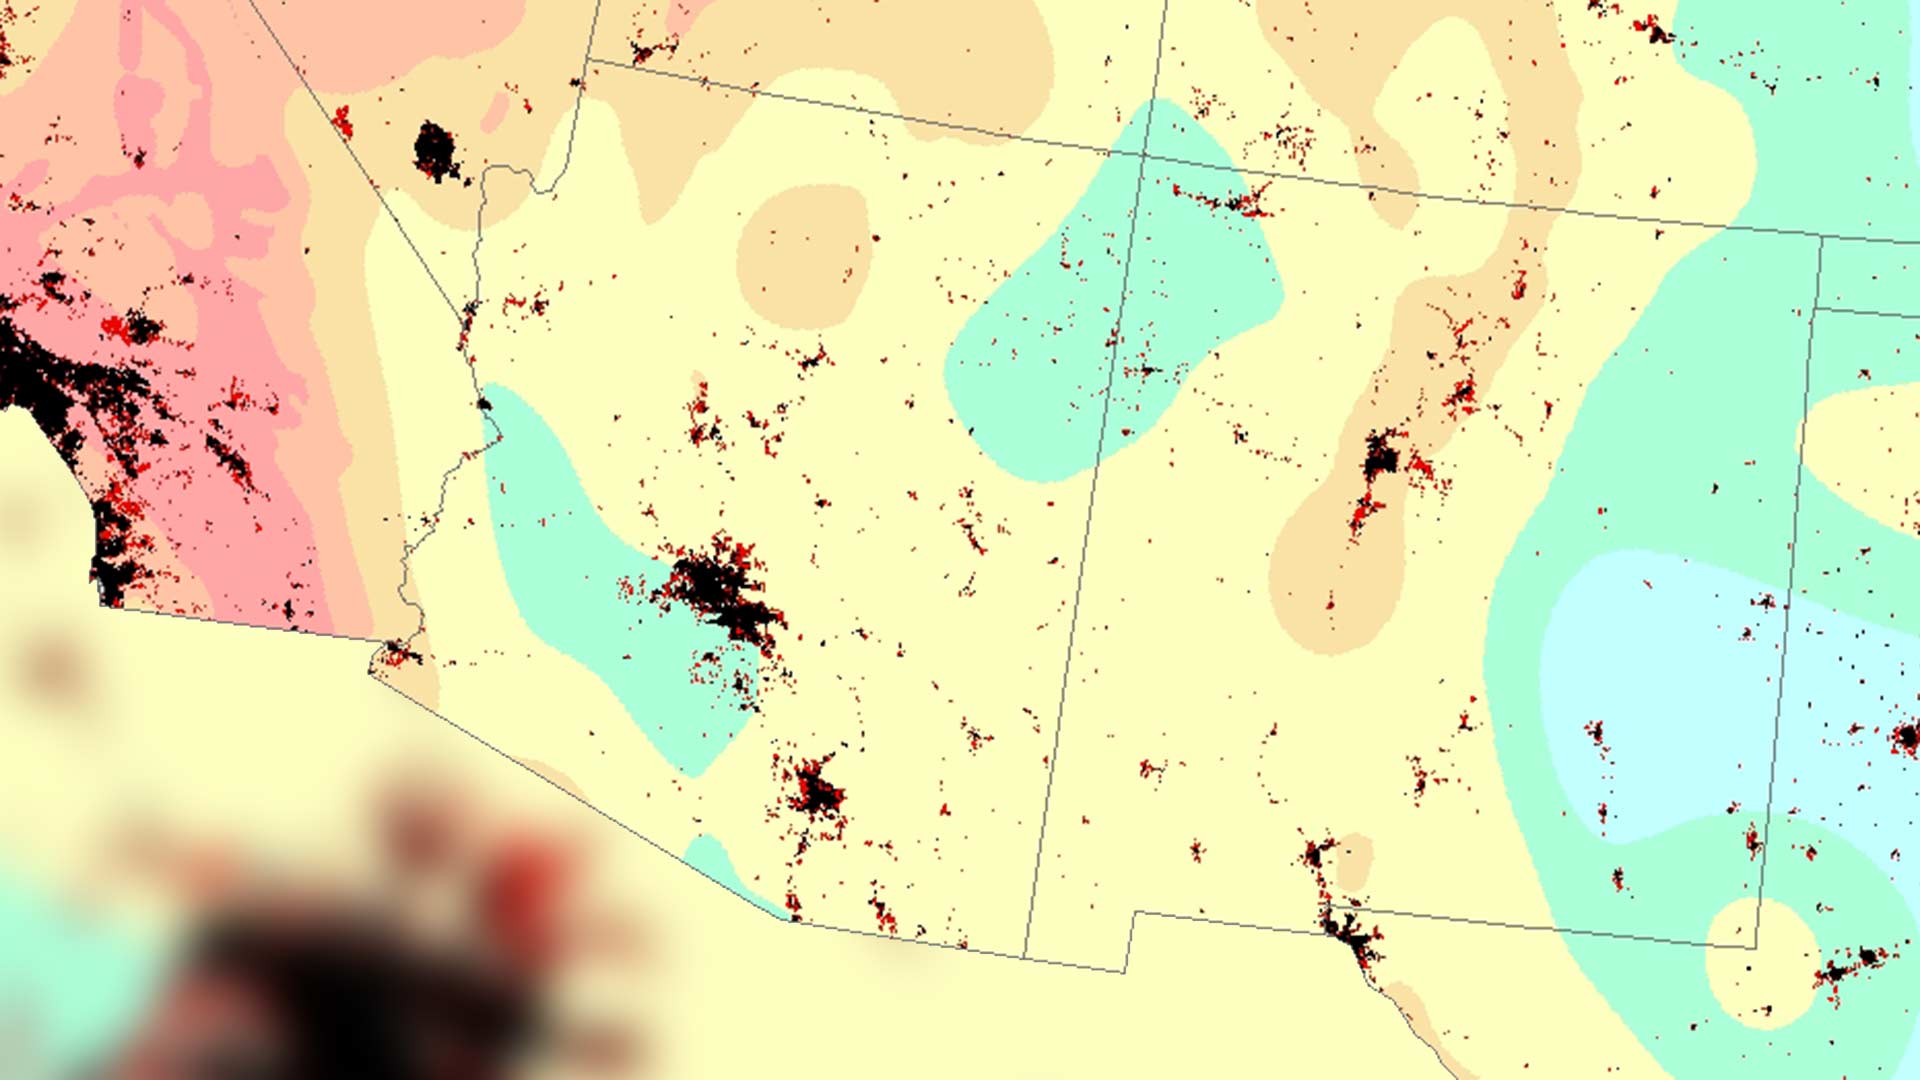 Image adapted from a U.S. Geological Survey [map](https://www.usgs.gov/media/images/potential-earthquake-map-shaking) showing the intensity of potential earthquakes in relation to population centers.